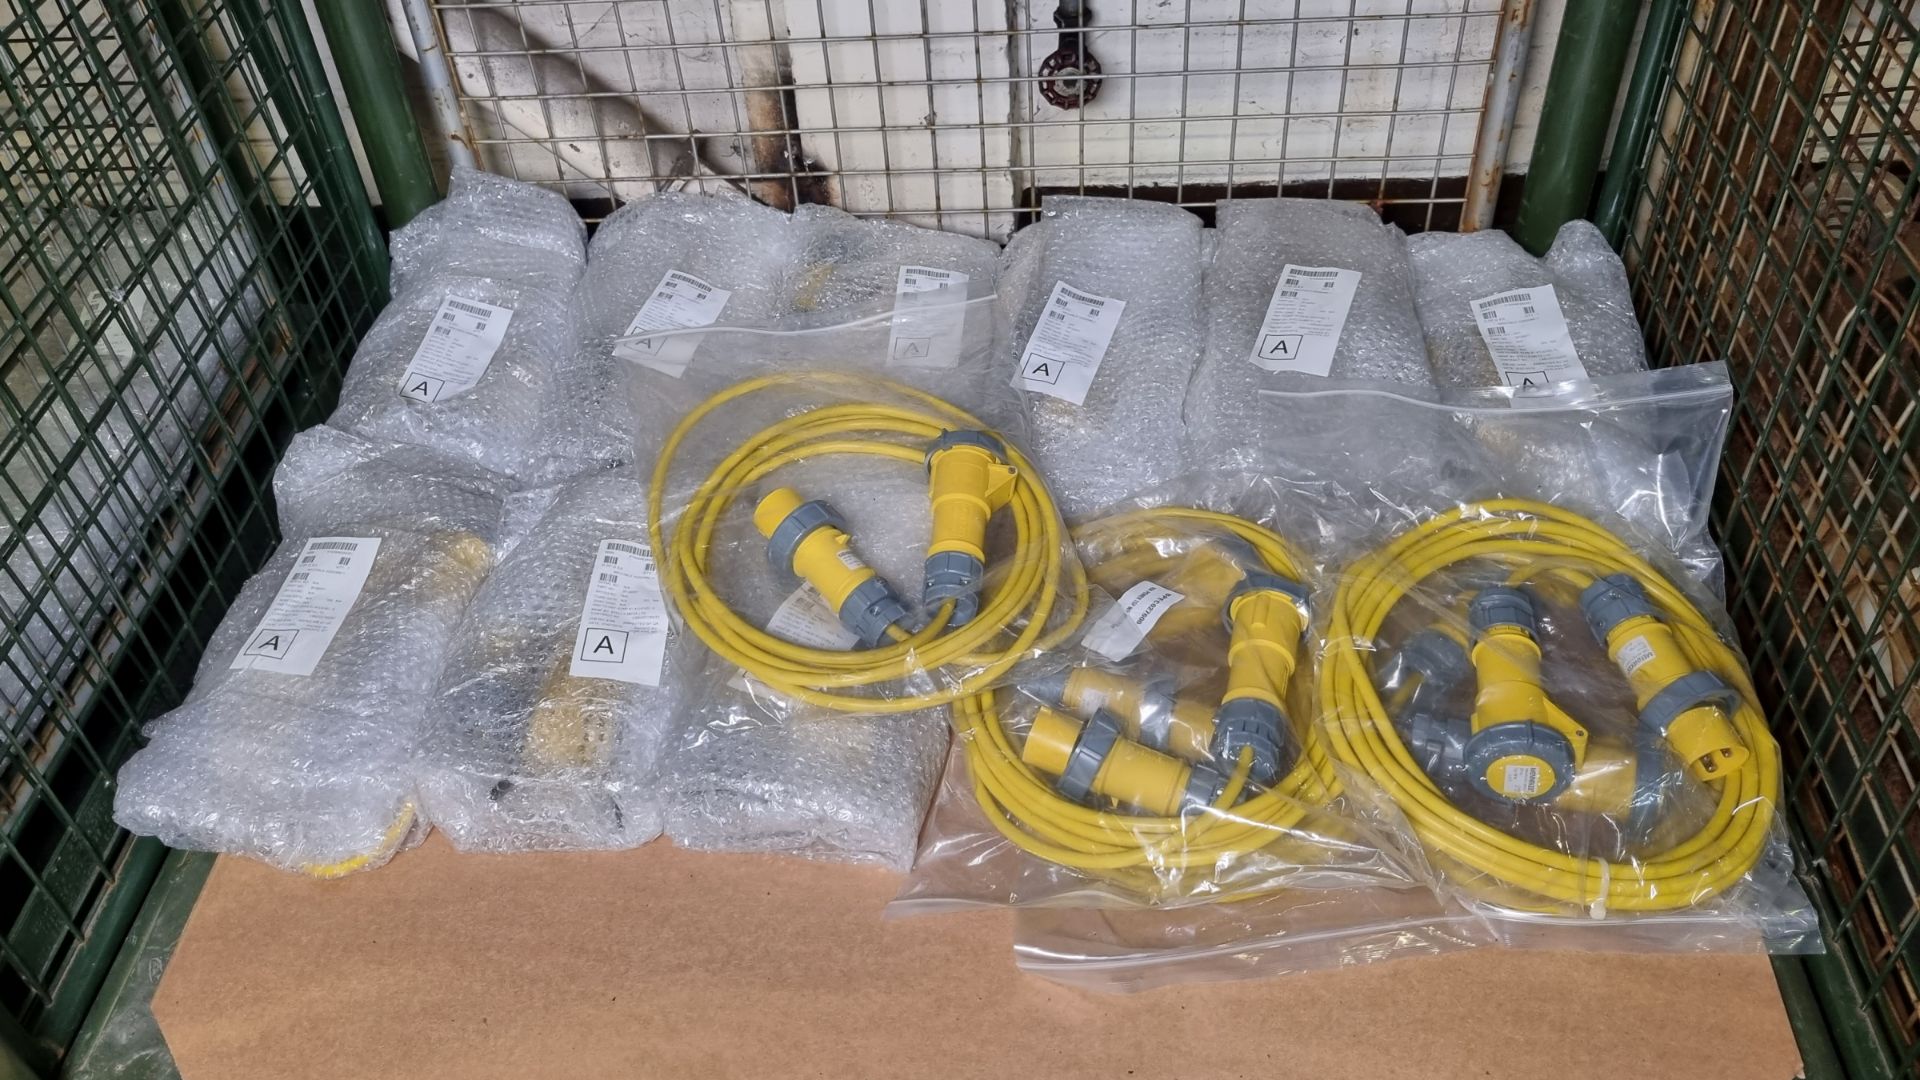 14x 110V extension leads with Mennekes Type 3794 & Type 3859 2P+E plugs - approx 5m length